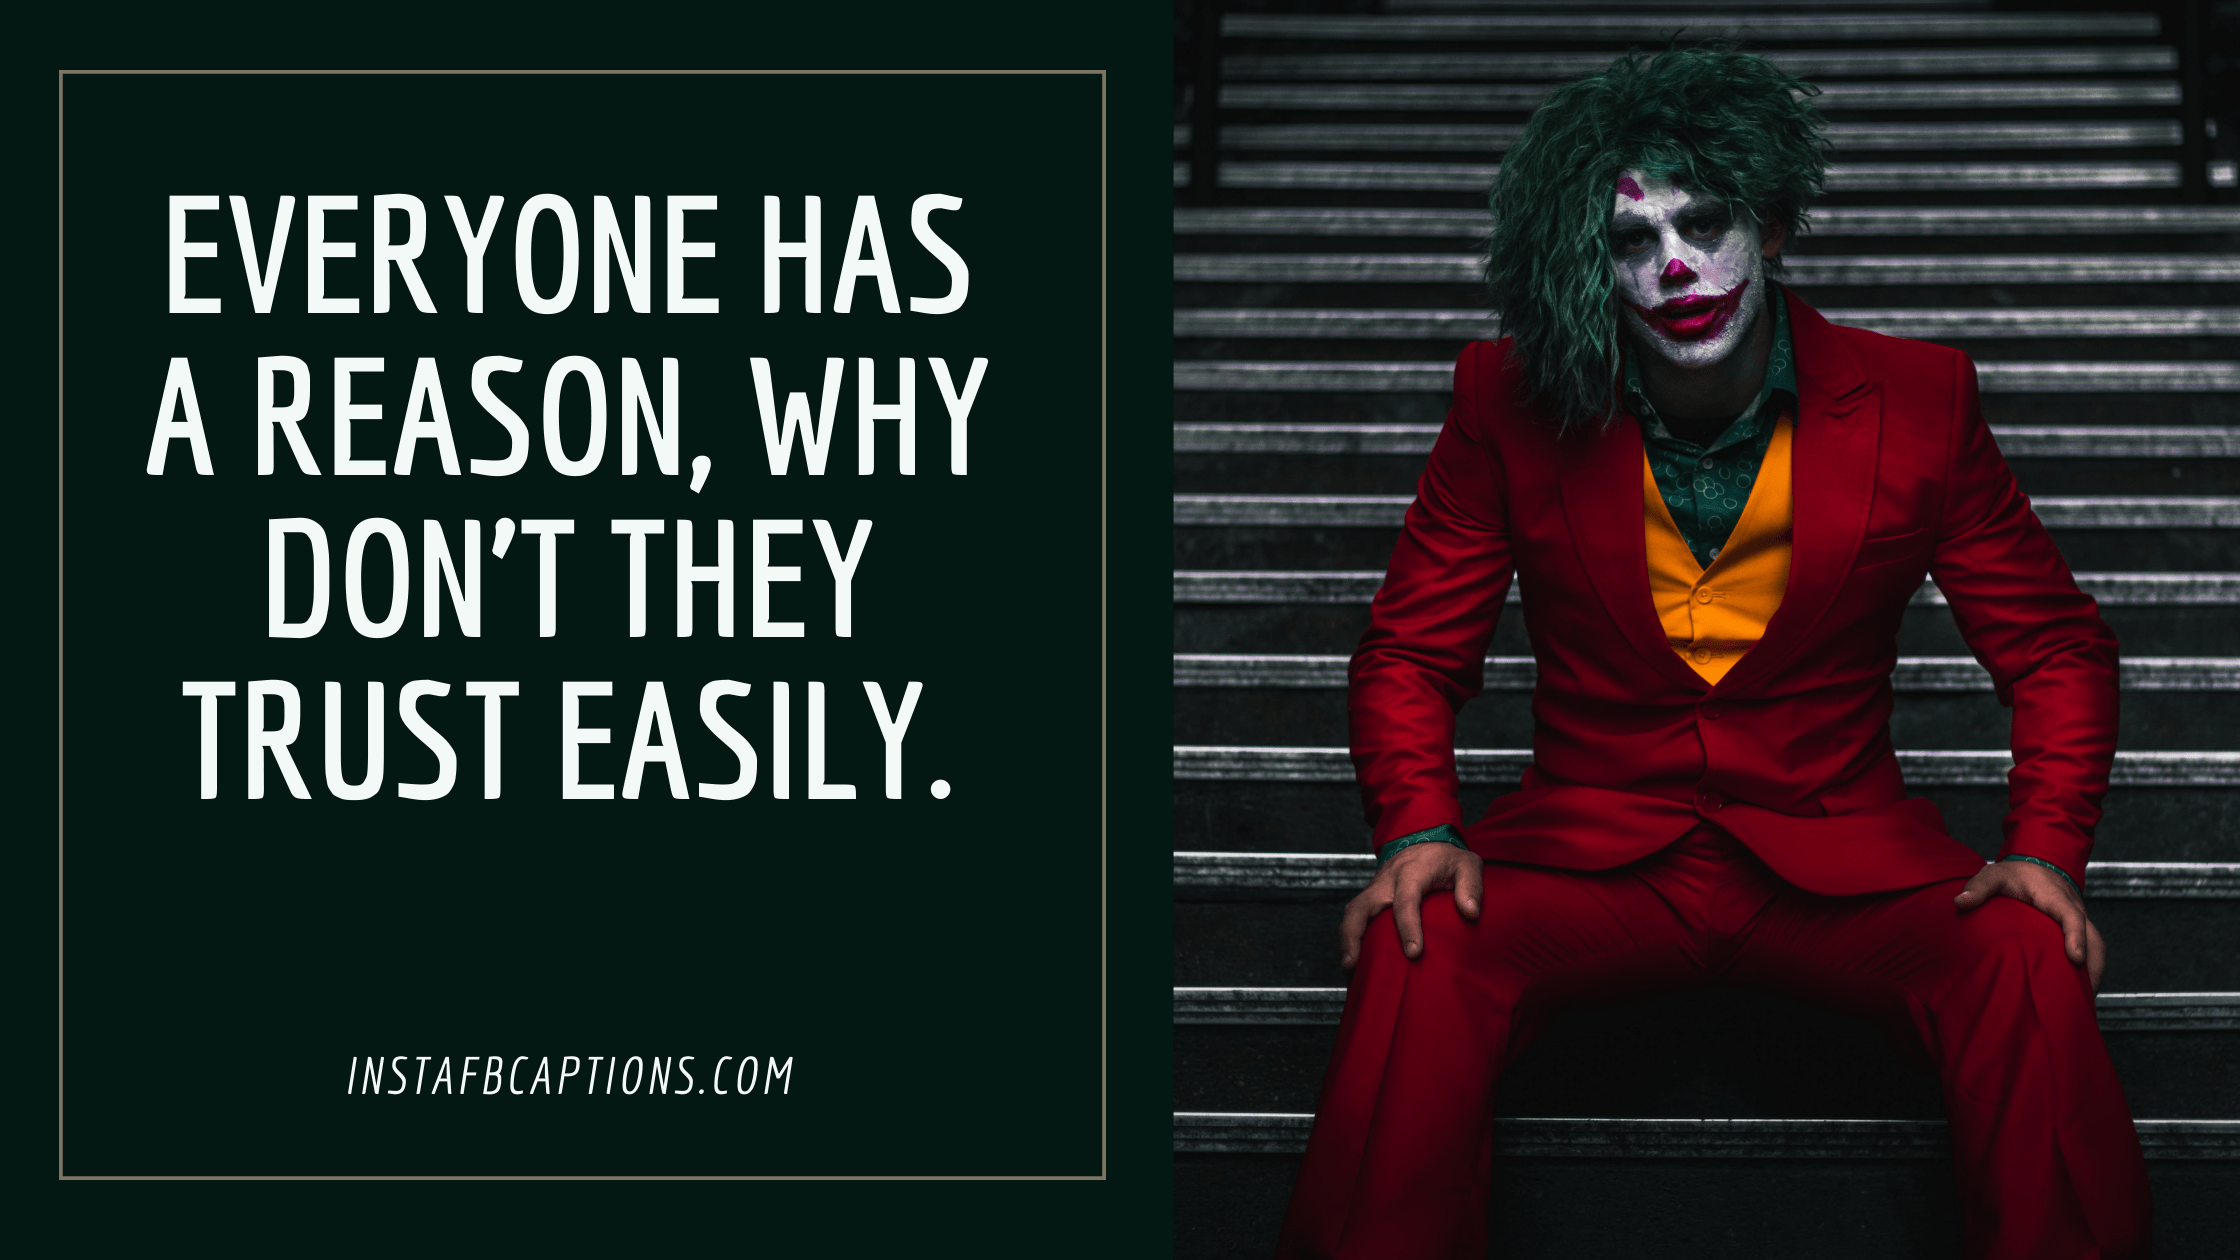 Attitude Joker Quotes  - Attitude Joker Quotes  - [New] JOKER Captions and Quotes for Instagram in 2023